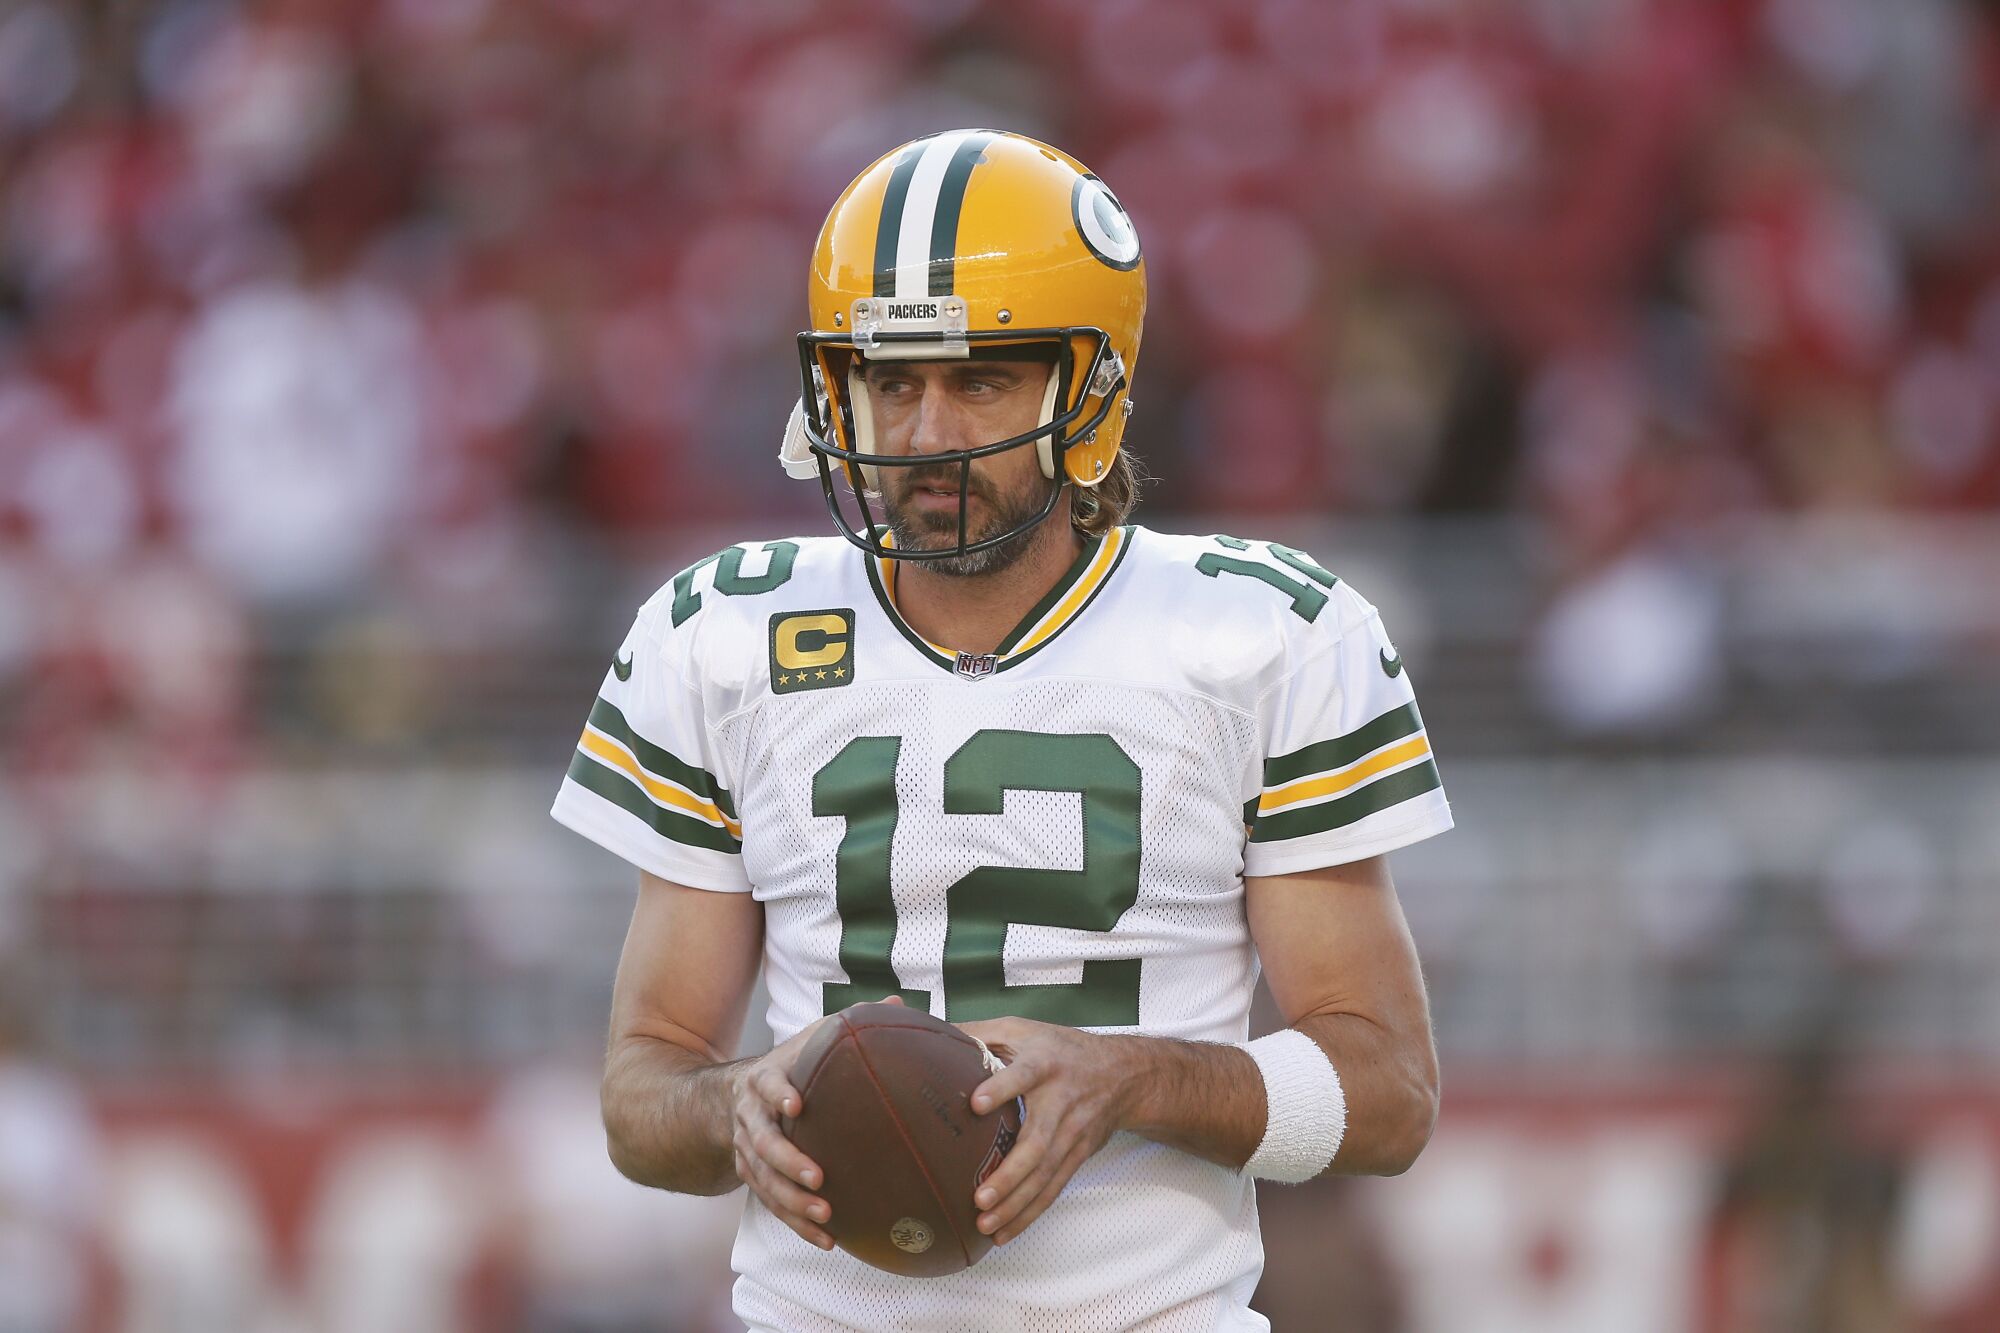 Green Bay Packers quarterback Aaron Rodgers looks on during the pre-game warm up.